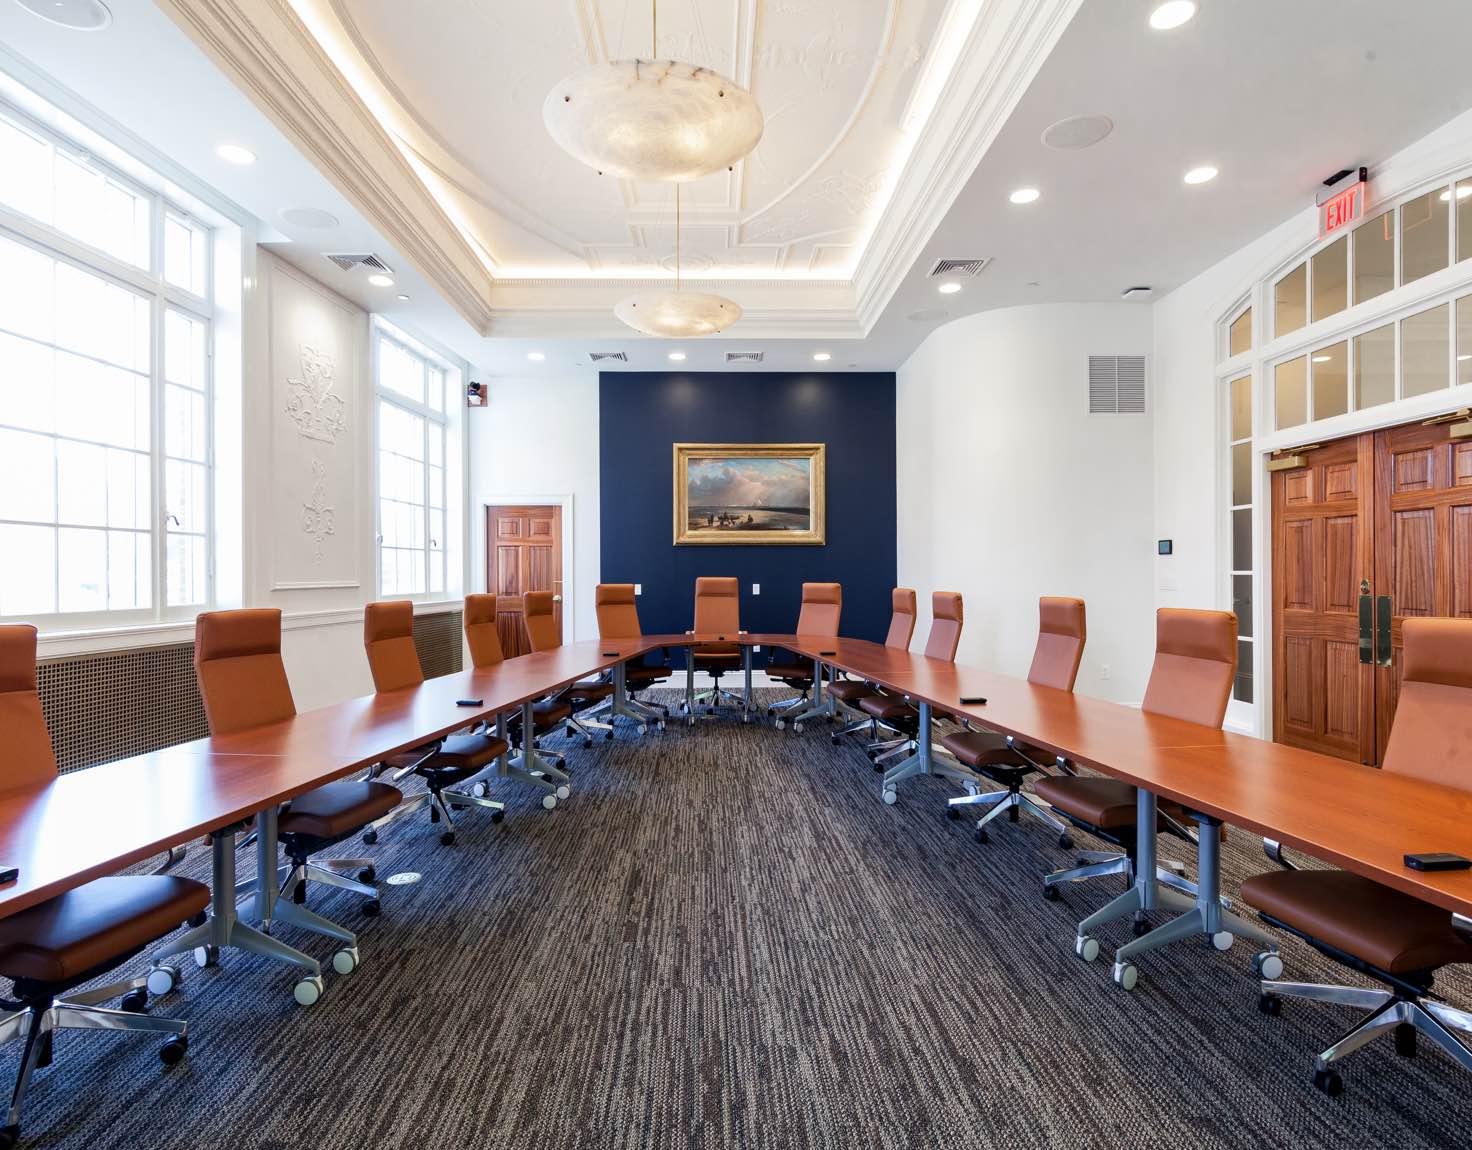 A conference room with a "V" shaped table and many brown chairs on wheels.